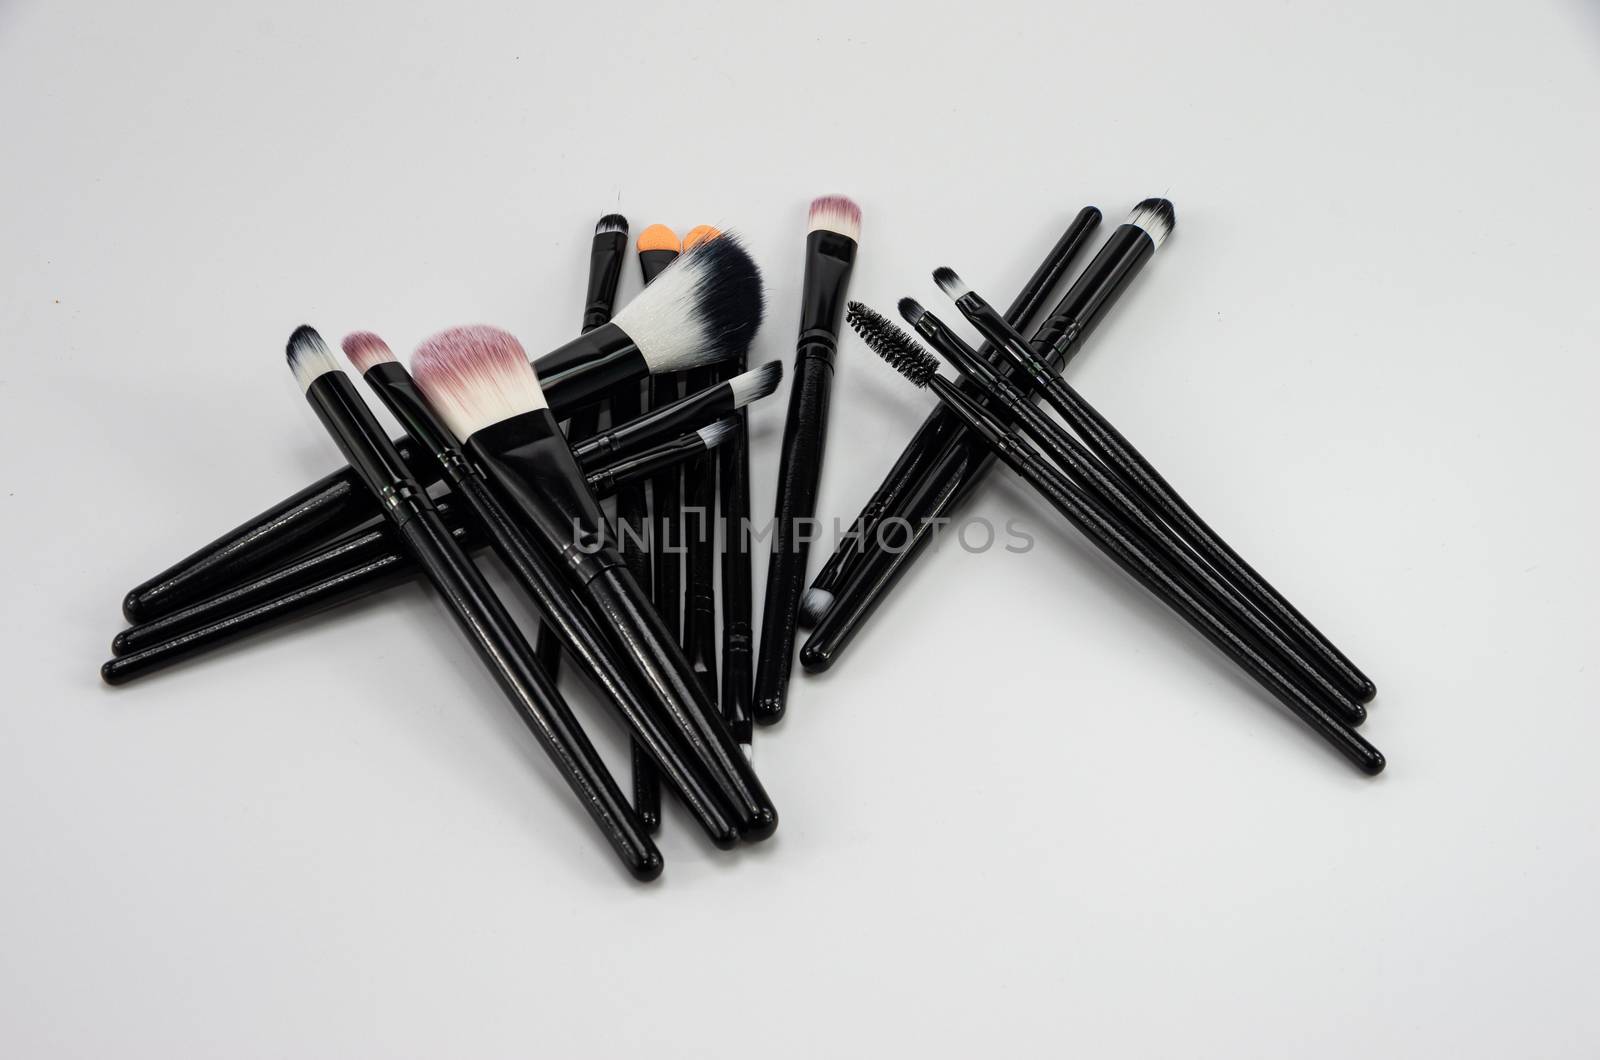 Various cosmetic brushes for make up eyebrows, eyes, face black